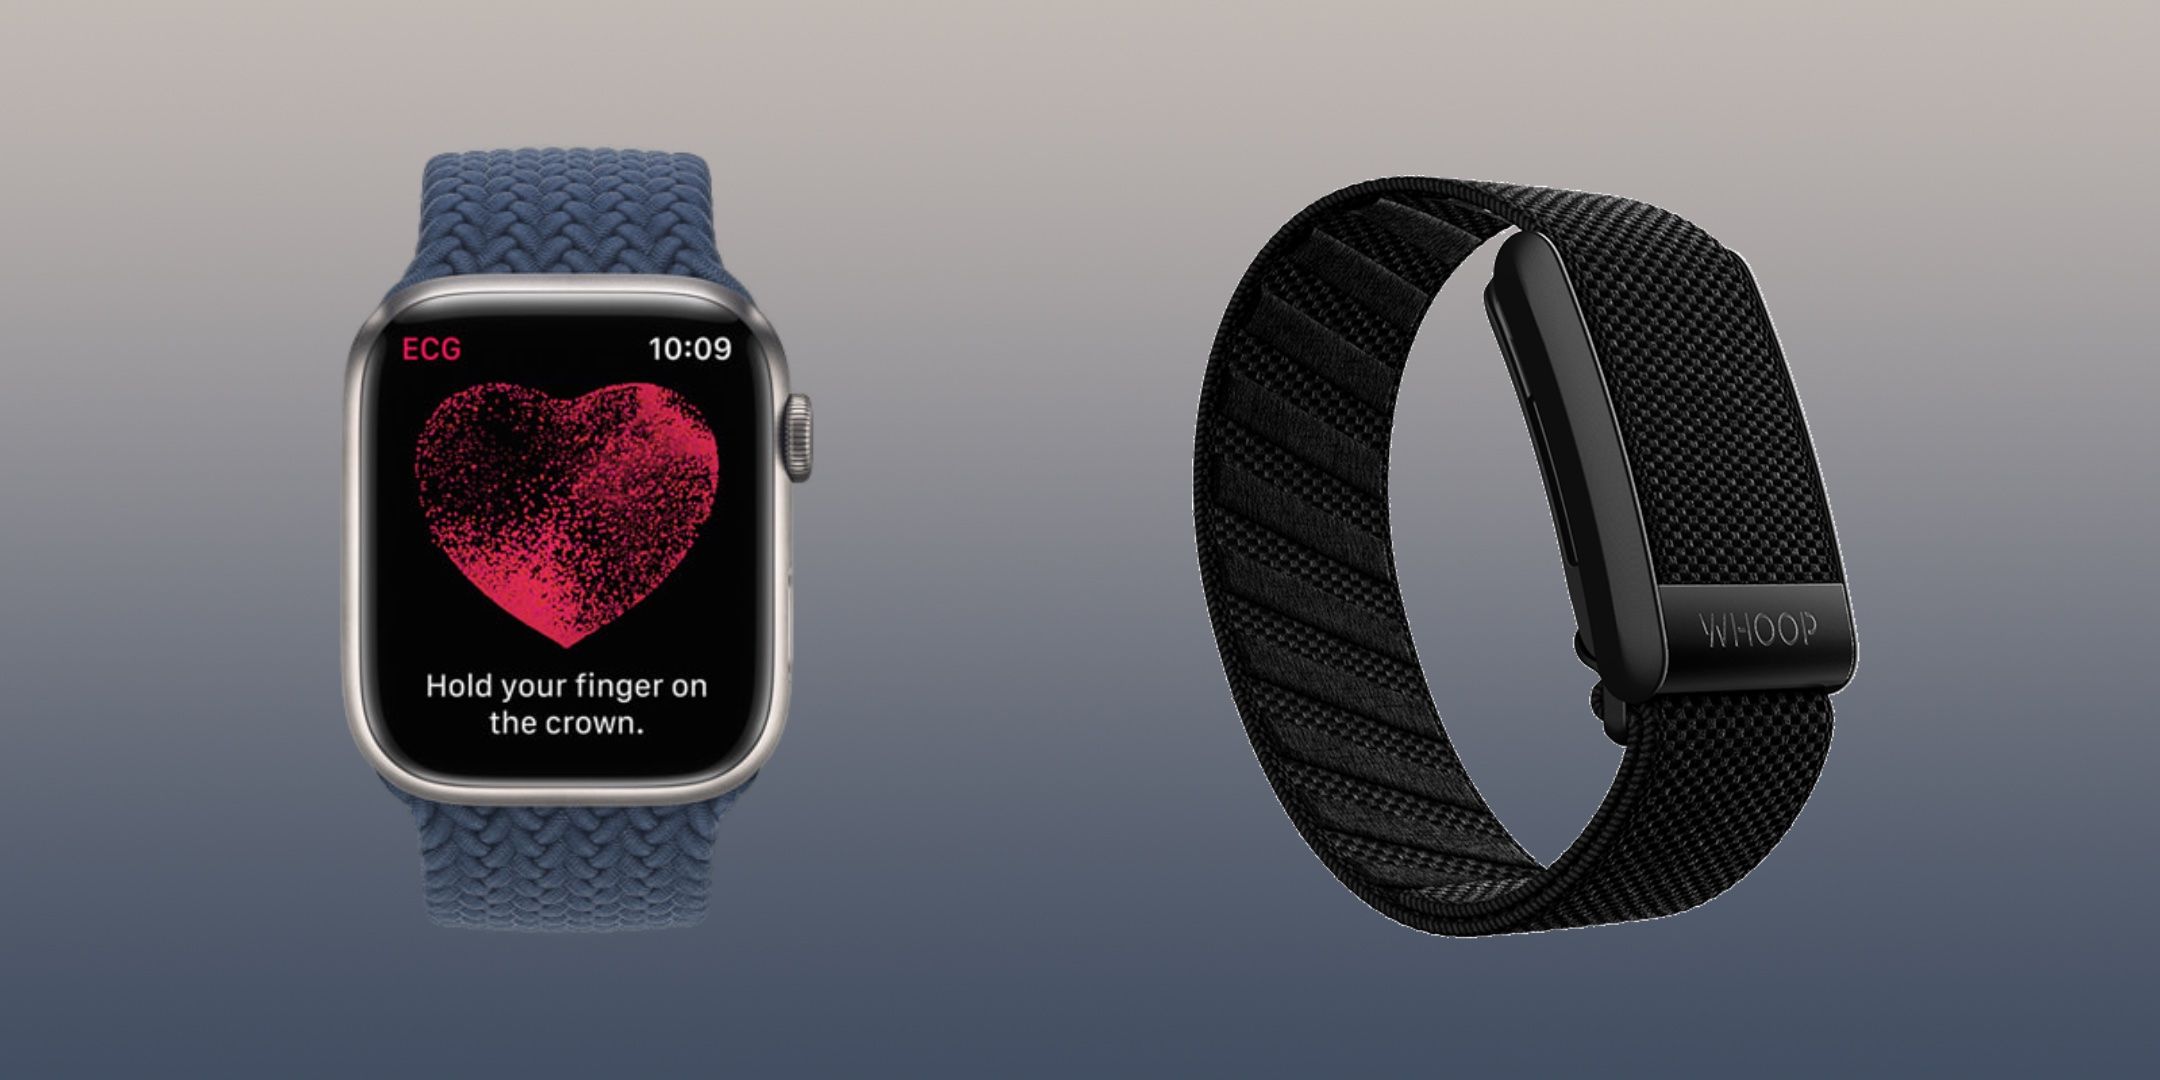 The Apple Watch and Whoop fitness trackers. 